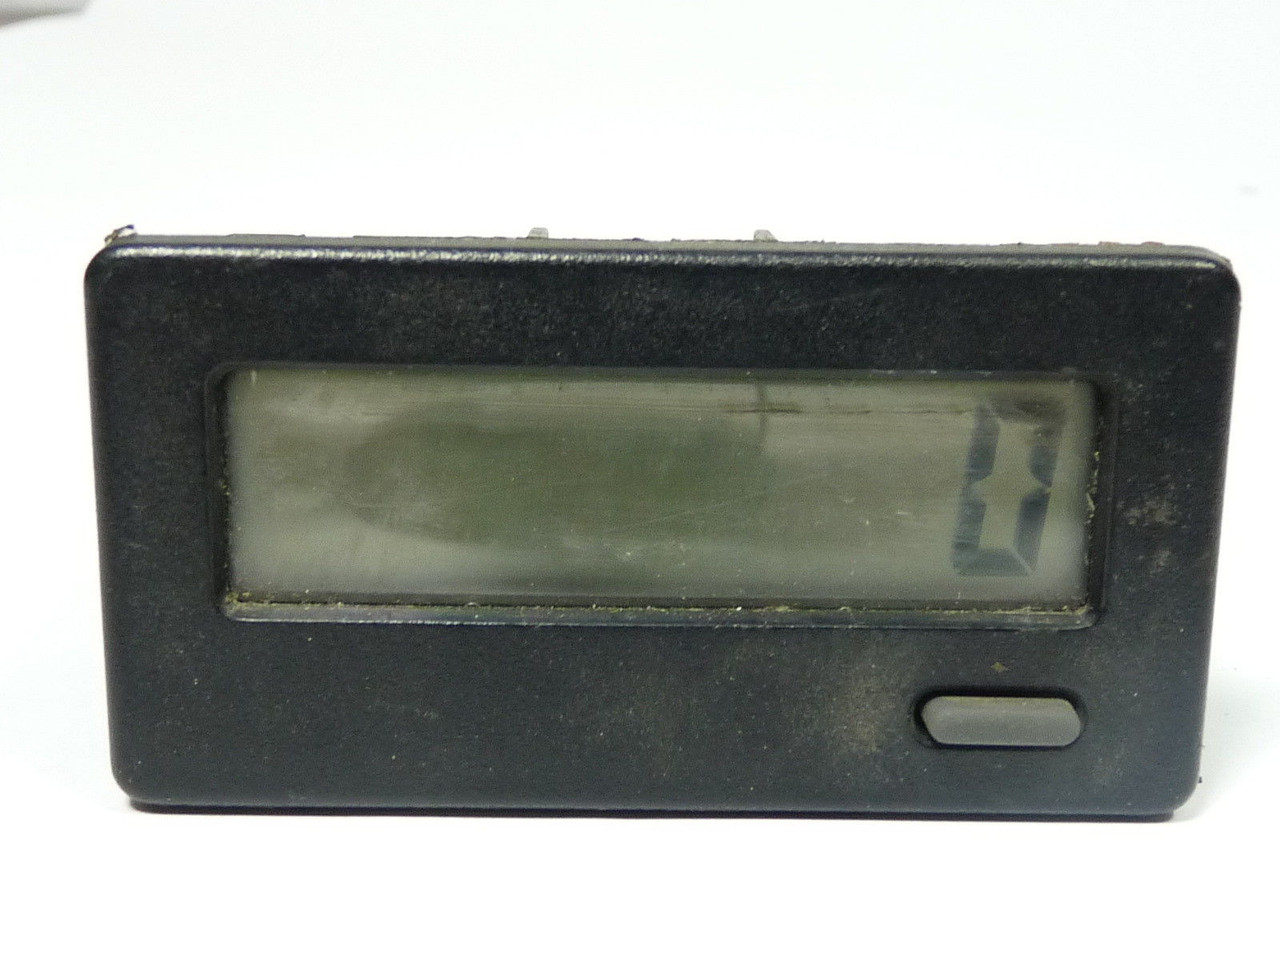 Red Lion Controls CUB4I000 CUB 4 DC Current Meter Reflective Display USED